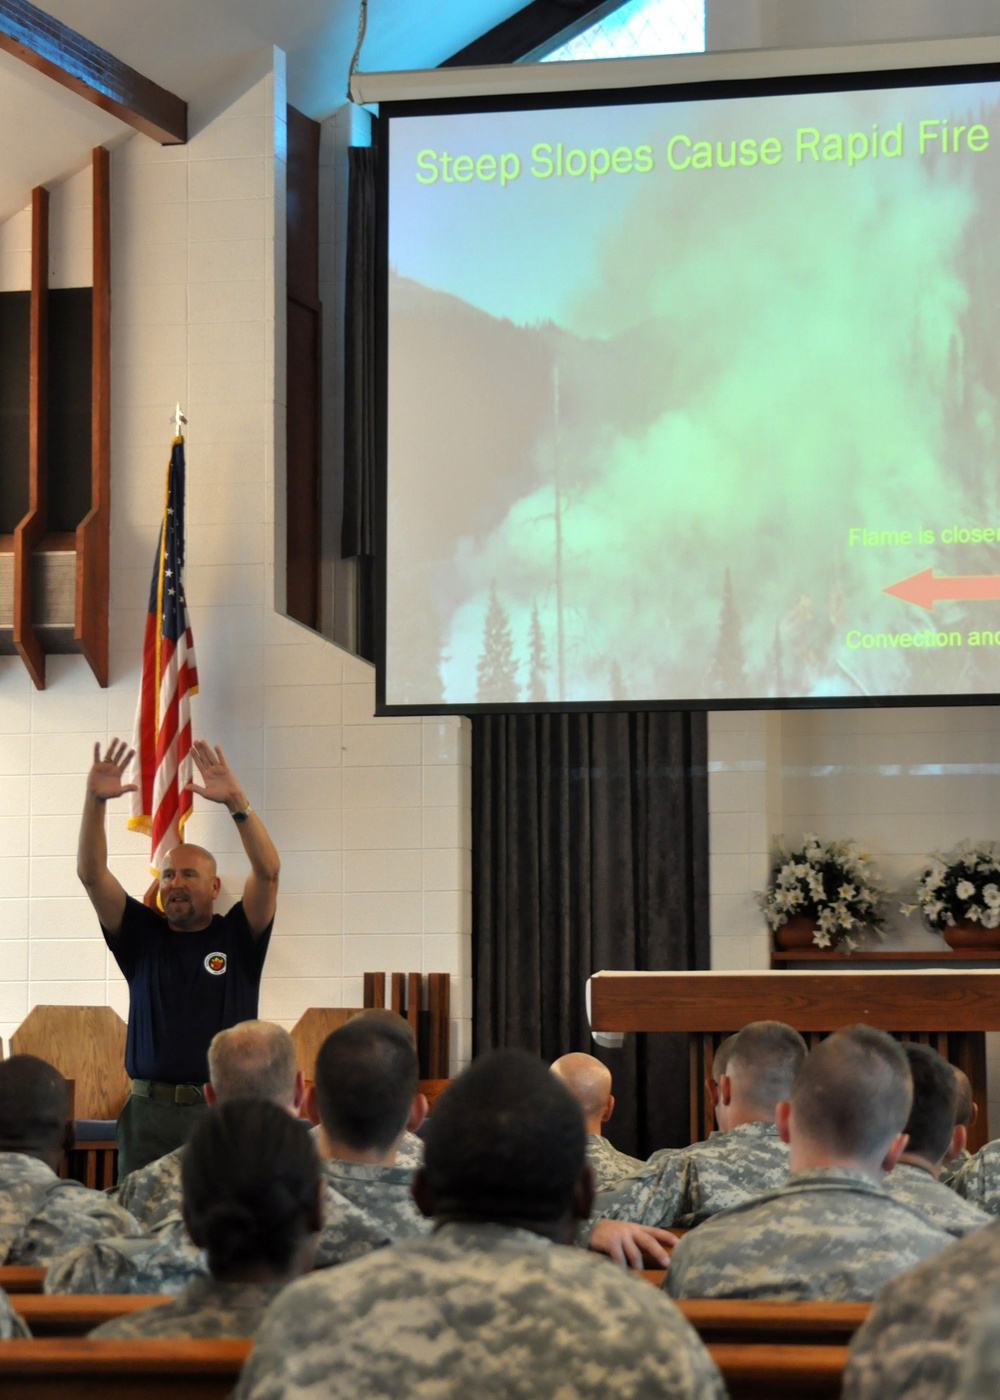 Fort Carson learns skills to assist in national firefighting efforts